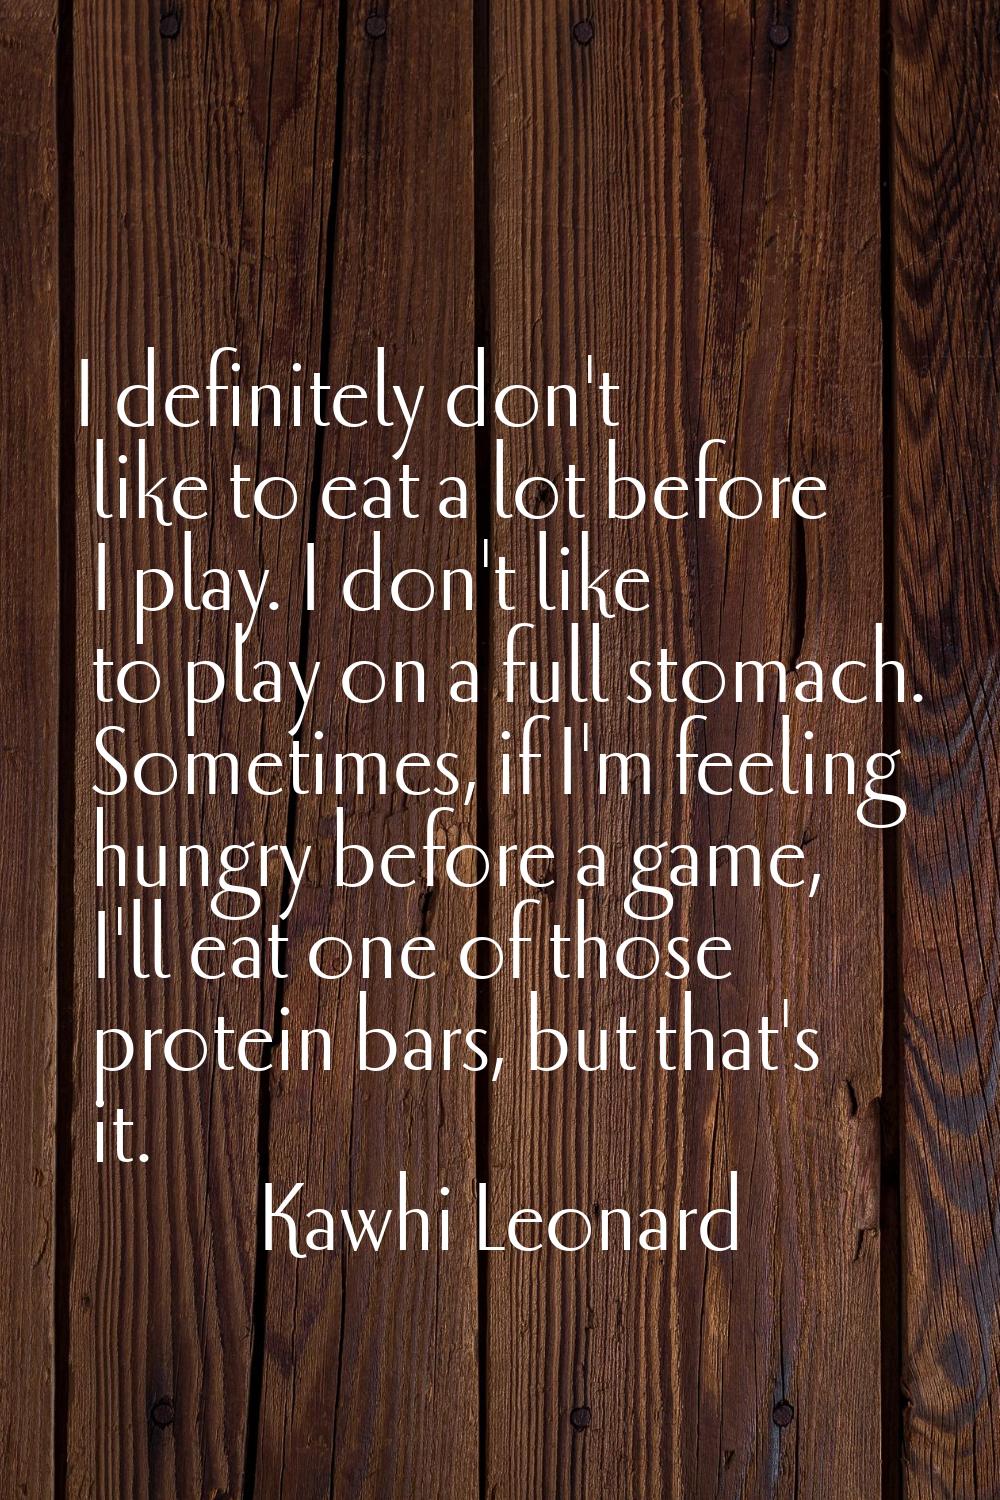 I definitely don't like to eat a lot before I play. I don't like to play on a full stomach. Sometim